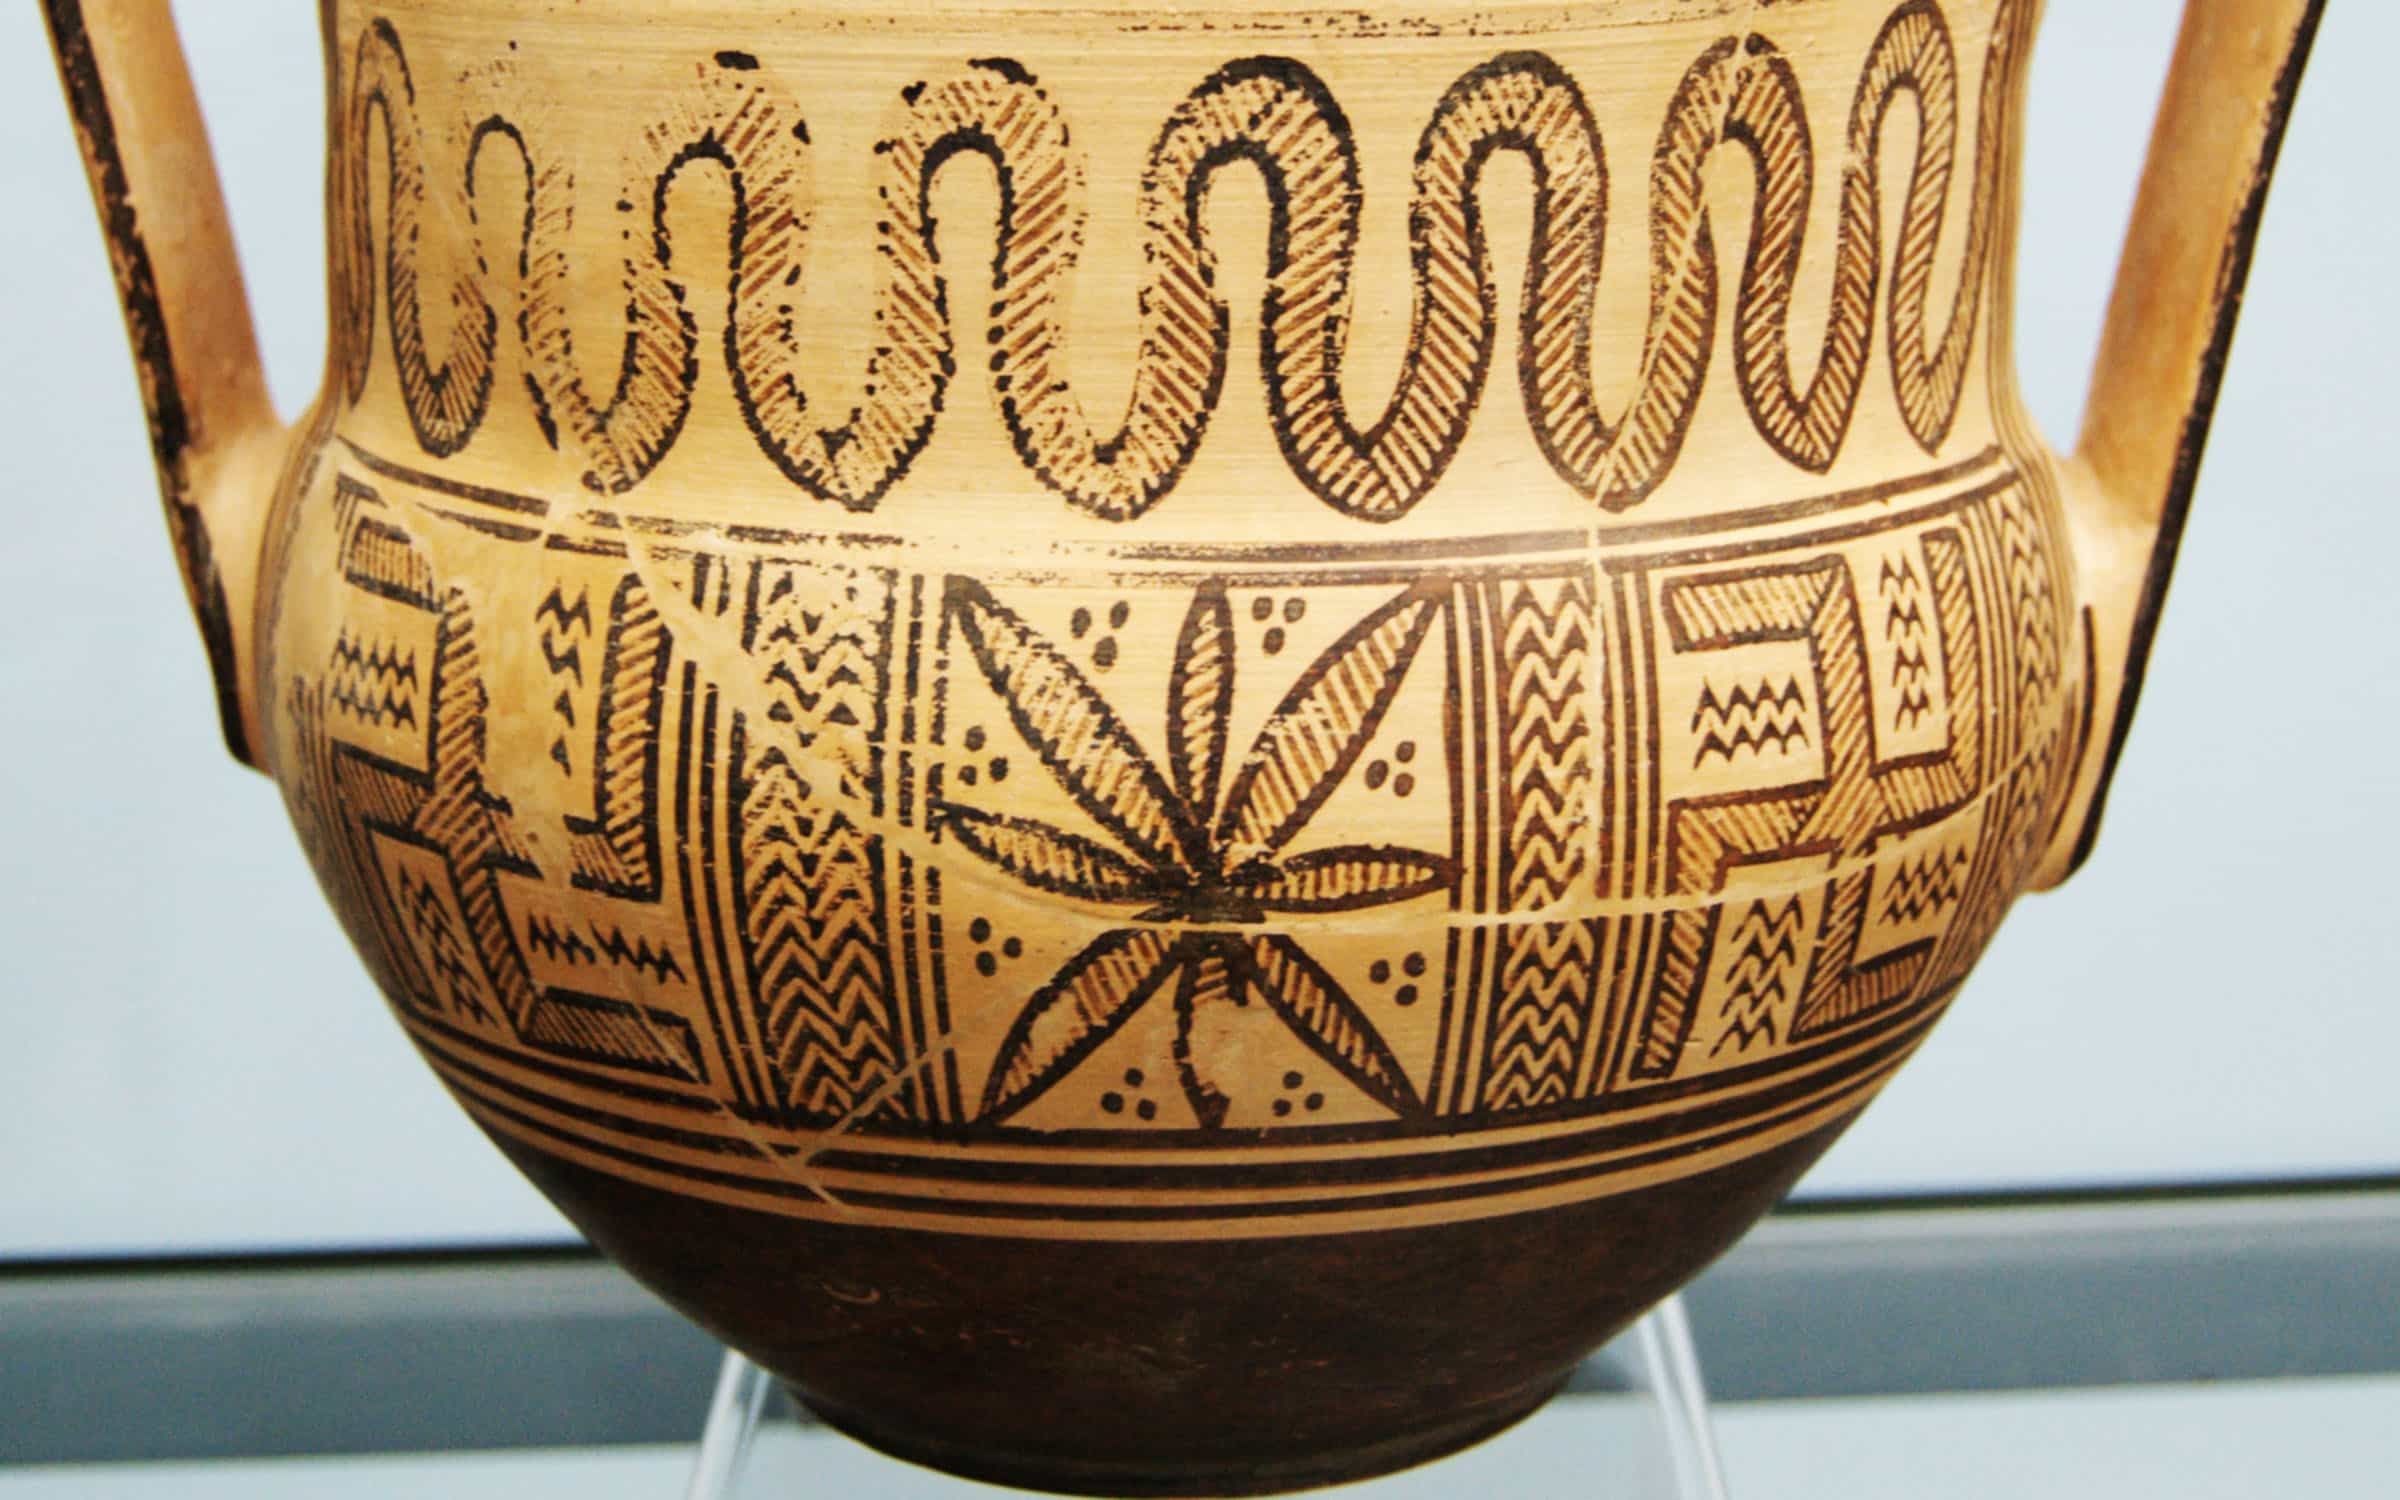 Cannabis in the ancient world